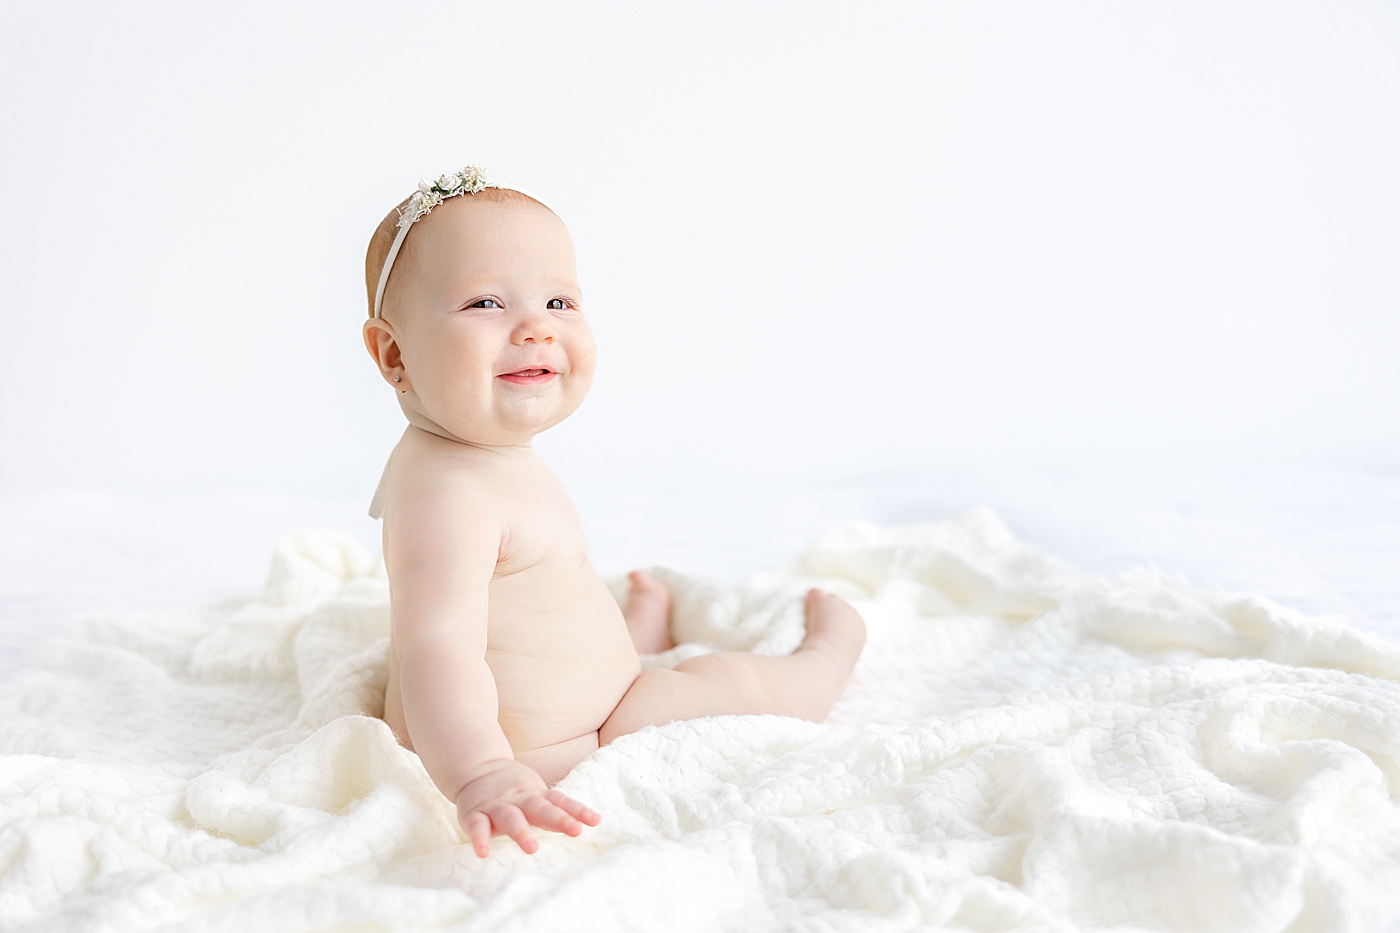 Baby girl sitting on a white blanket | Image by Sana Ahmed Photography